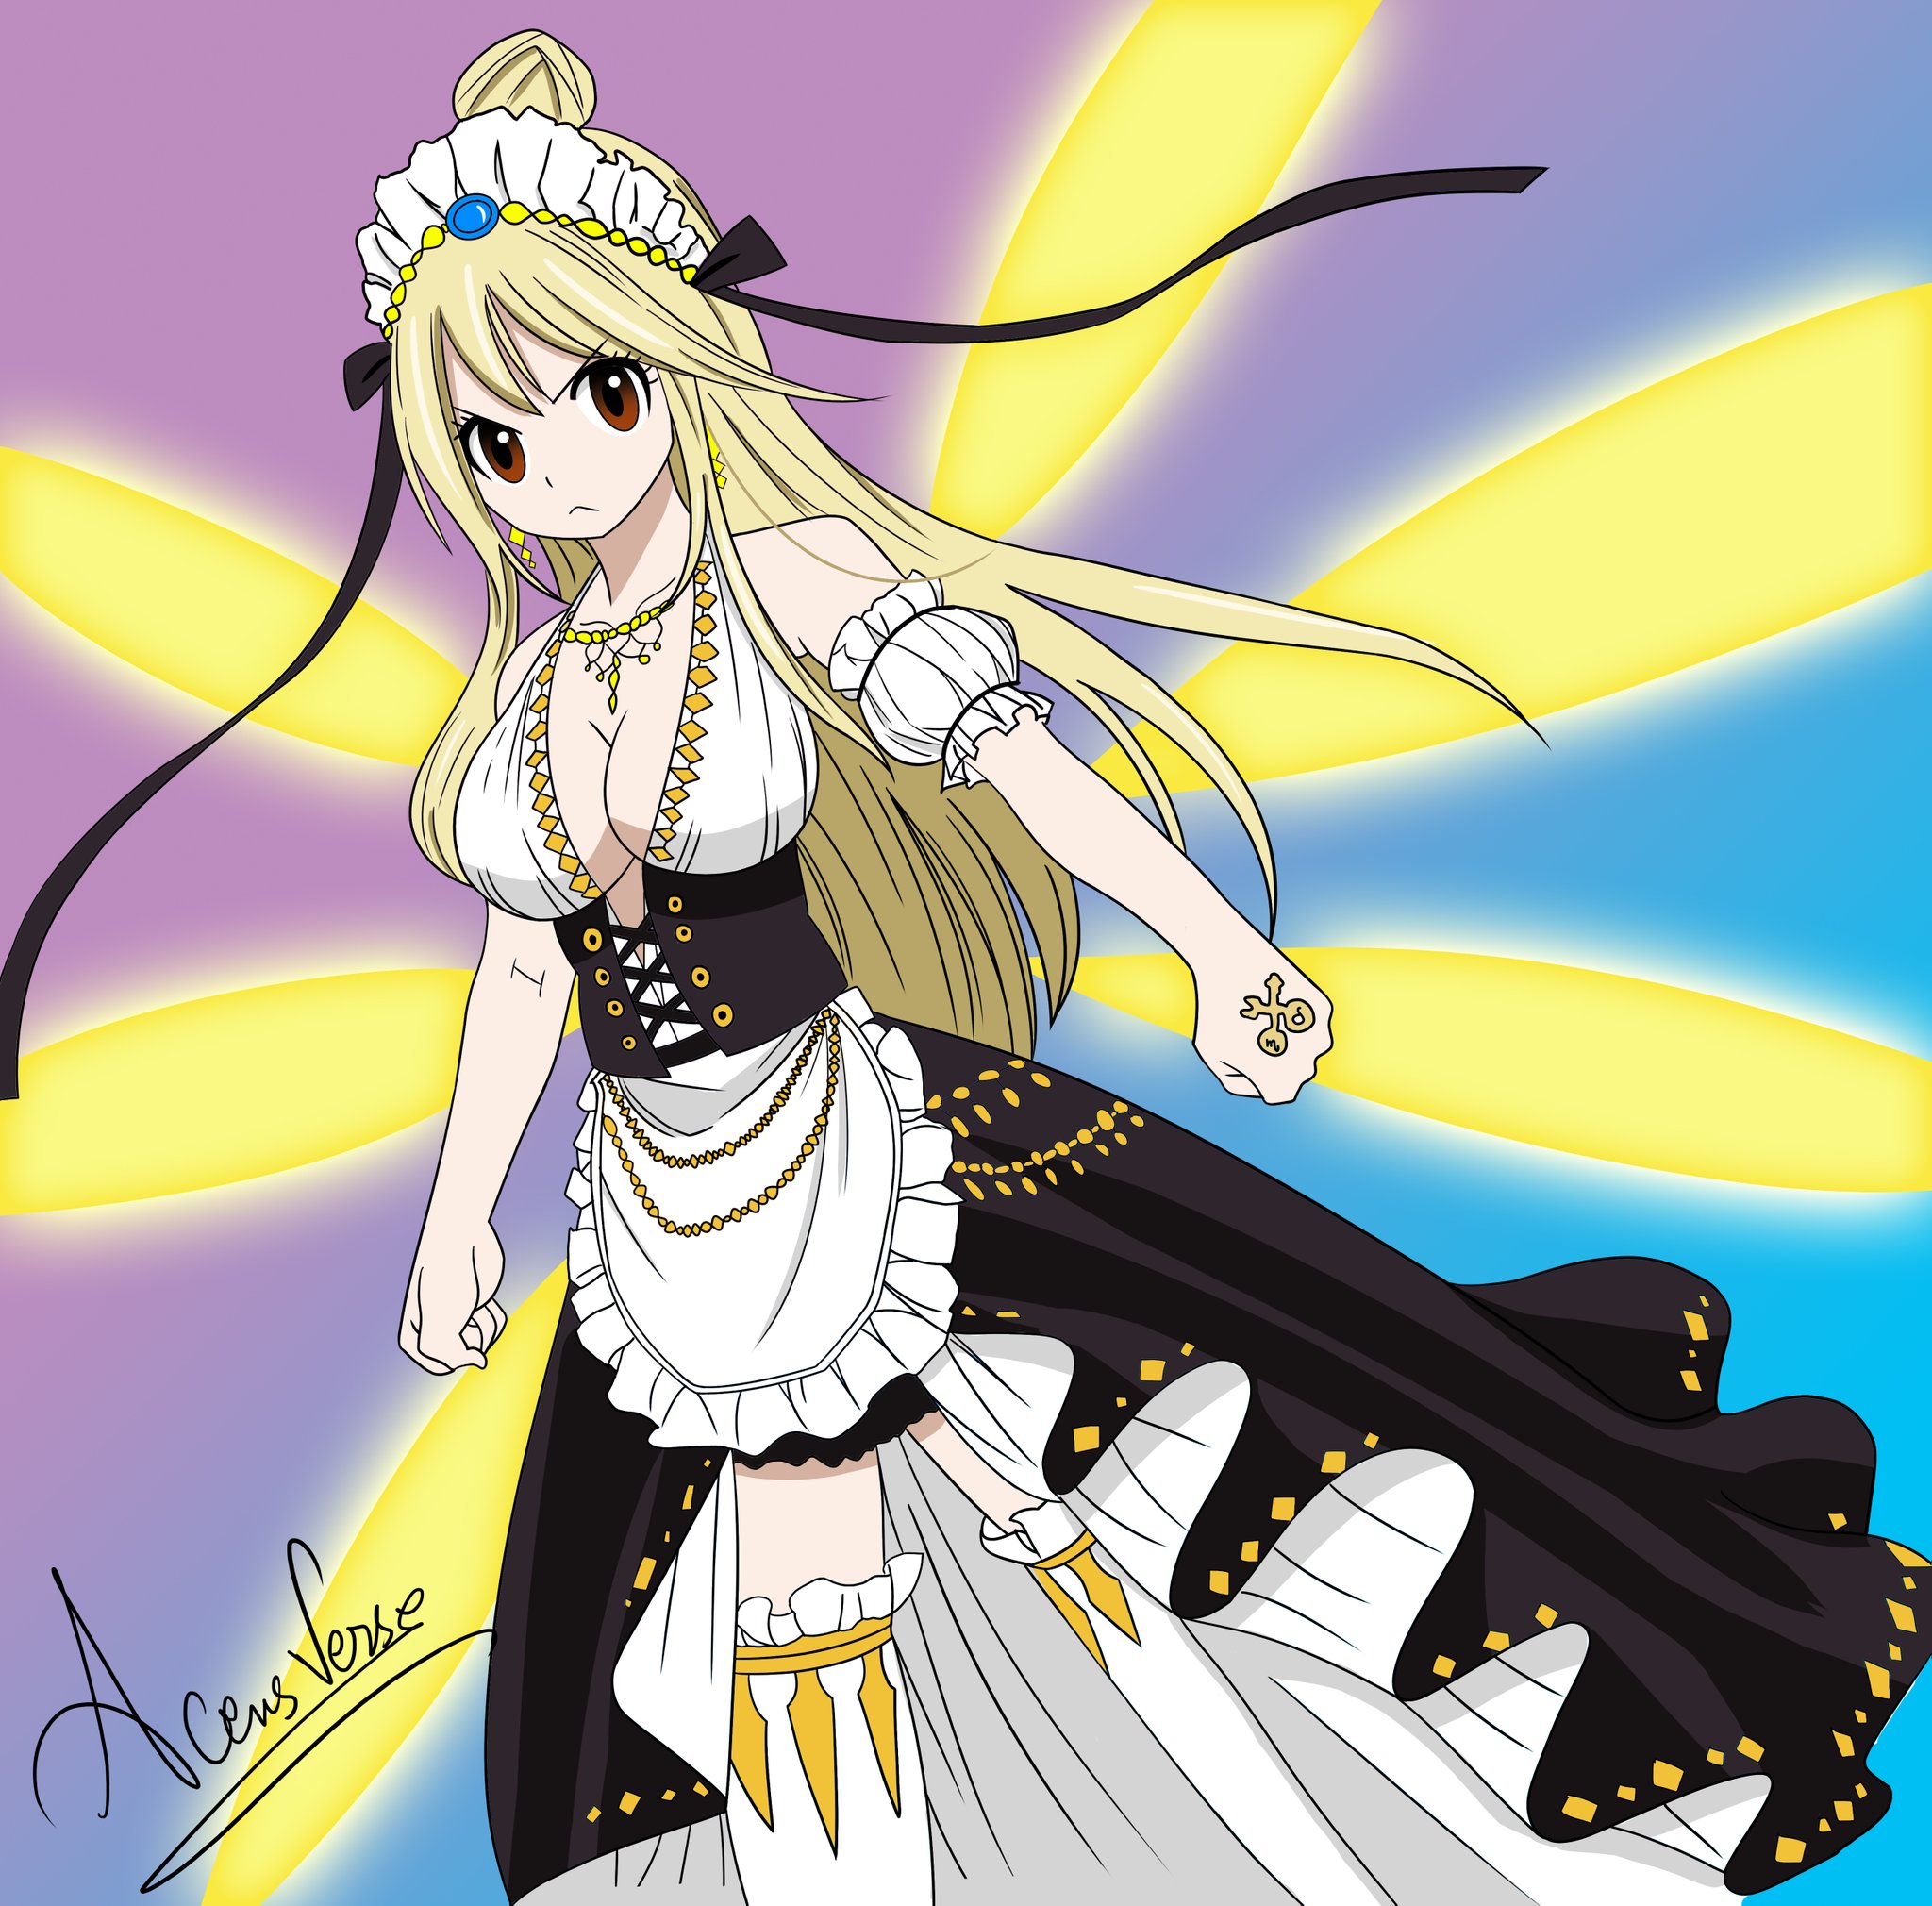 Ace on Twitter: "Fairy Tail 100 year Quest Chapter 32 - Star Dress Mix Lucy  Heartfilia Star dress mix form (Leo X Virgo) Anime Style Coloring  #fairytail #FairyTail #lucyheartfilia #natsu #nalu #Nalu #